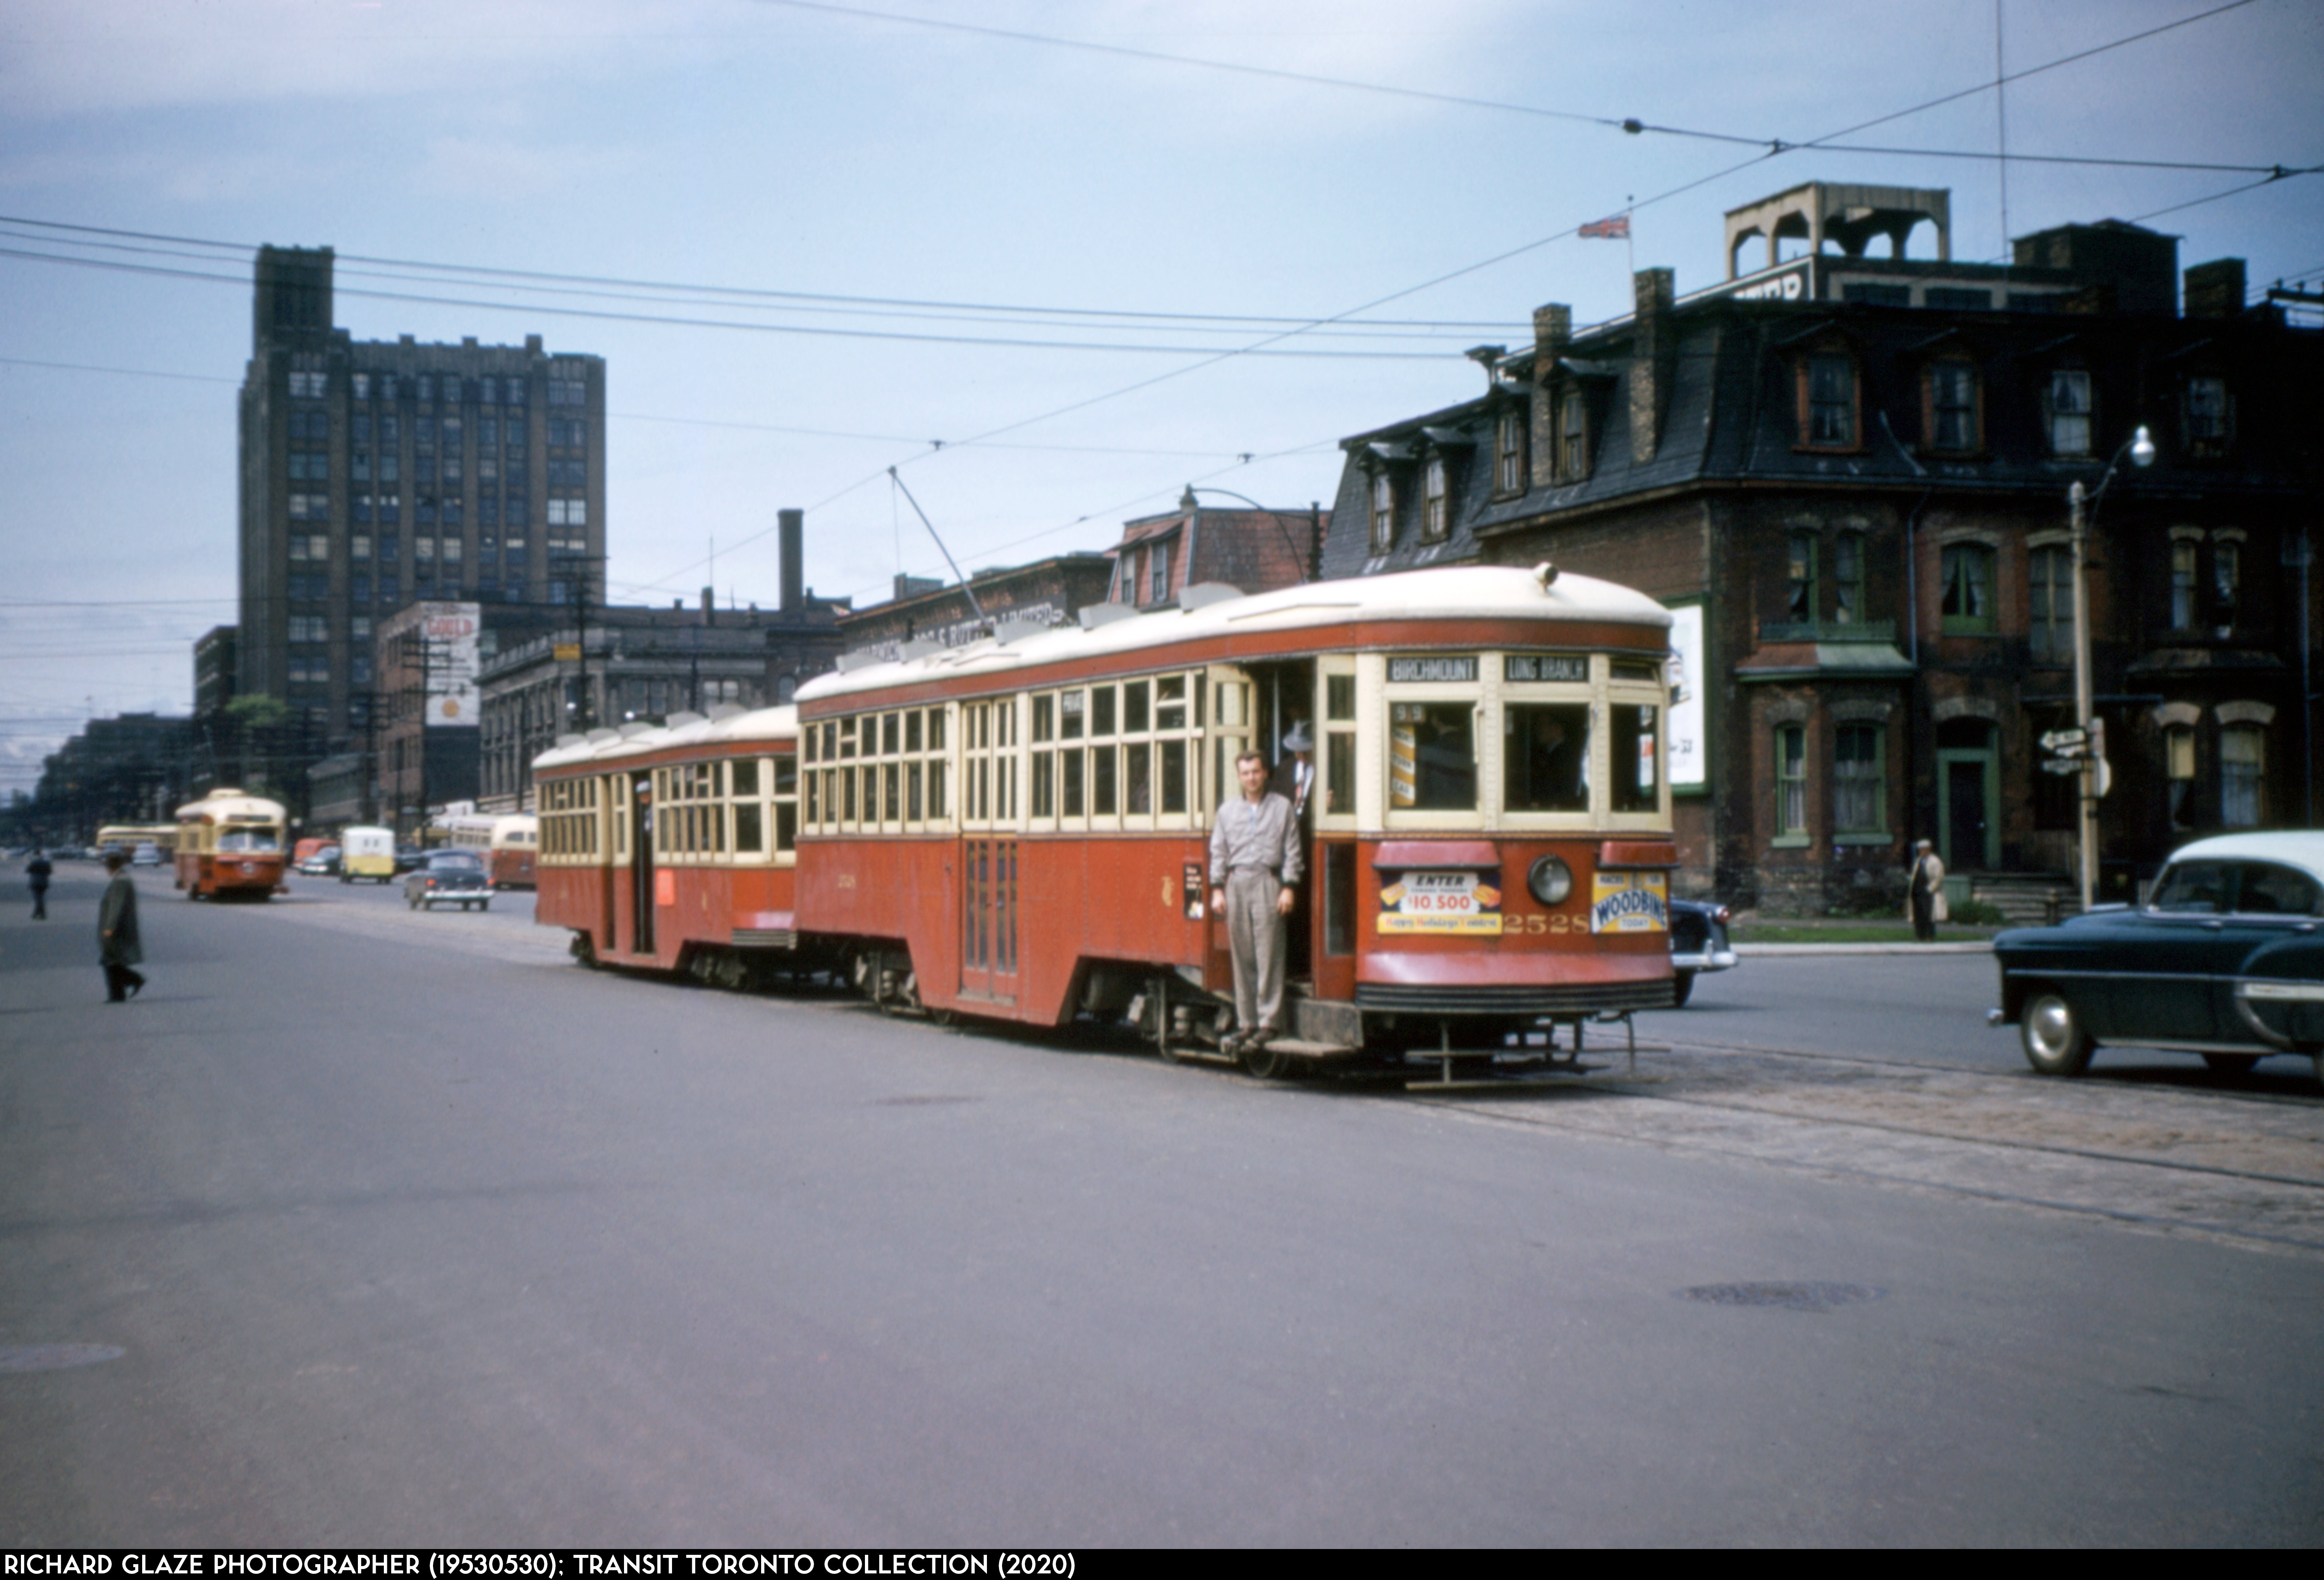 19530530 - 1446 Doubleheader Tour - 2528 and 4470 at Clarence Square